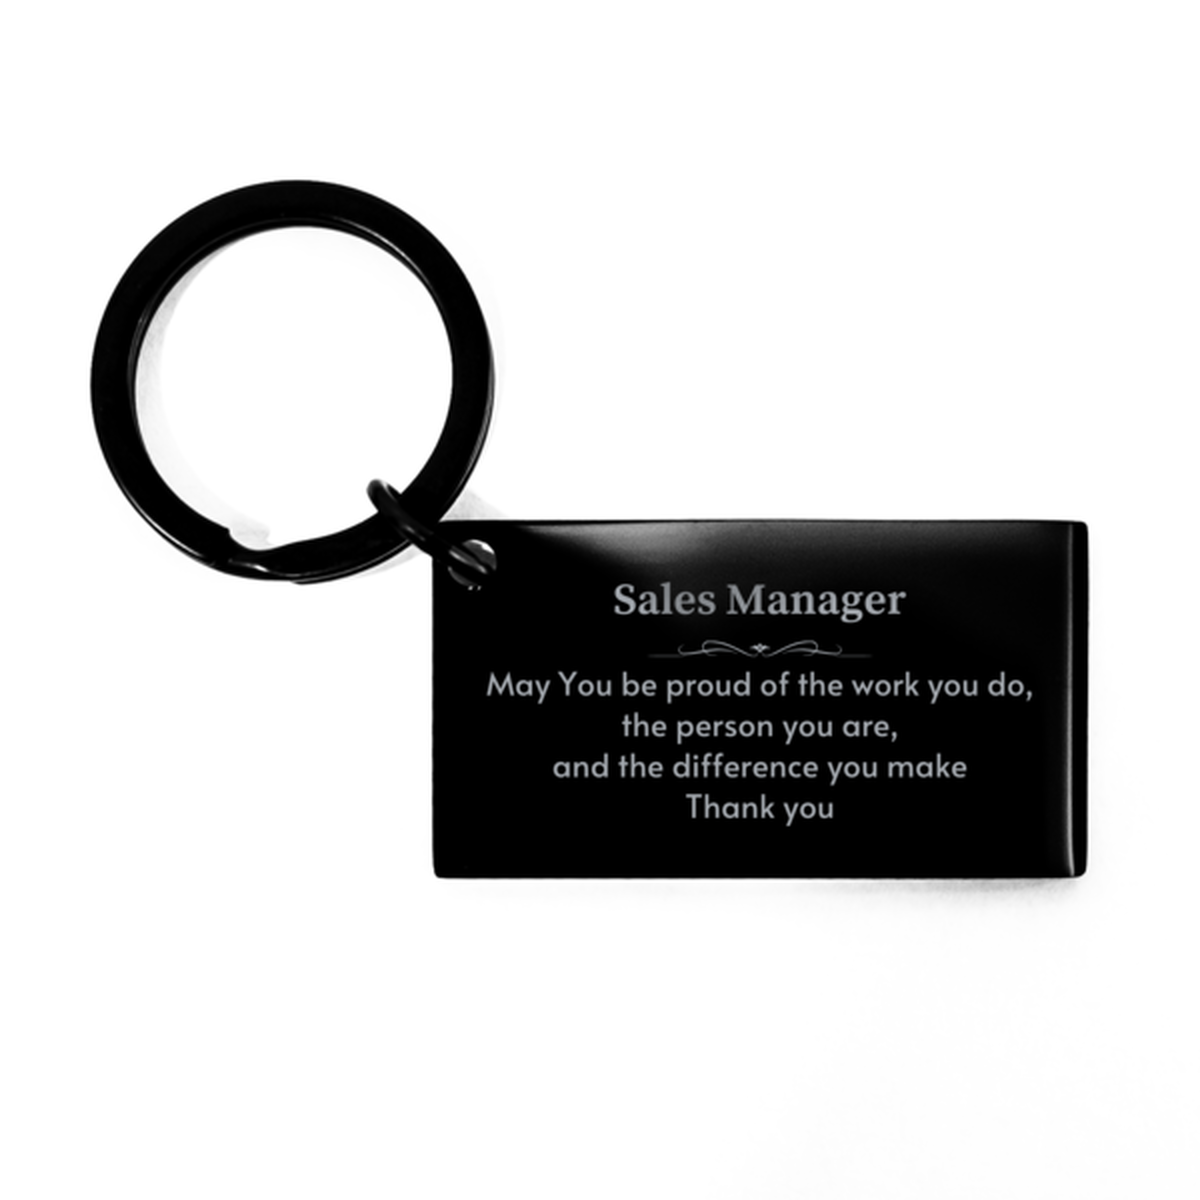 Heartwarming Keychain Retirement Coworkers Gifts for Sales Manager, Tour Guide May You be proud of the work you do, the person you are Gifts for Boss Men Women Friends